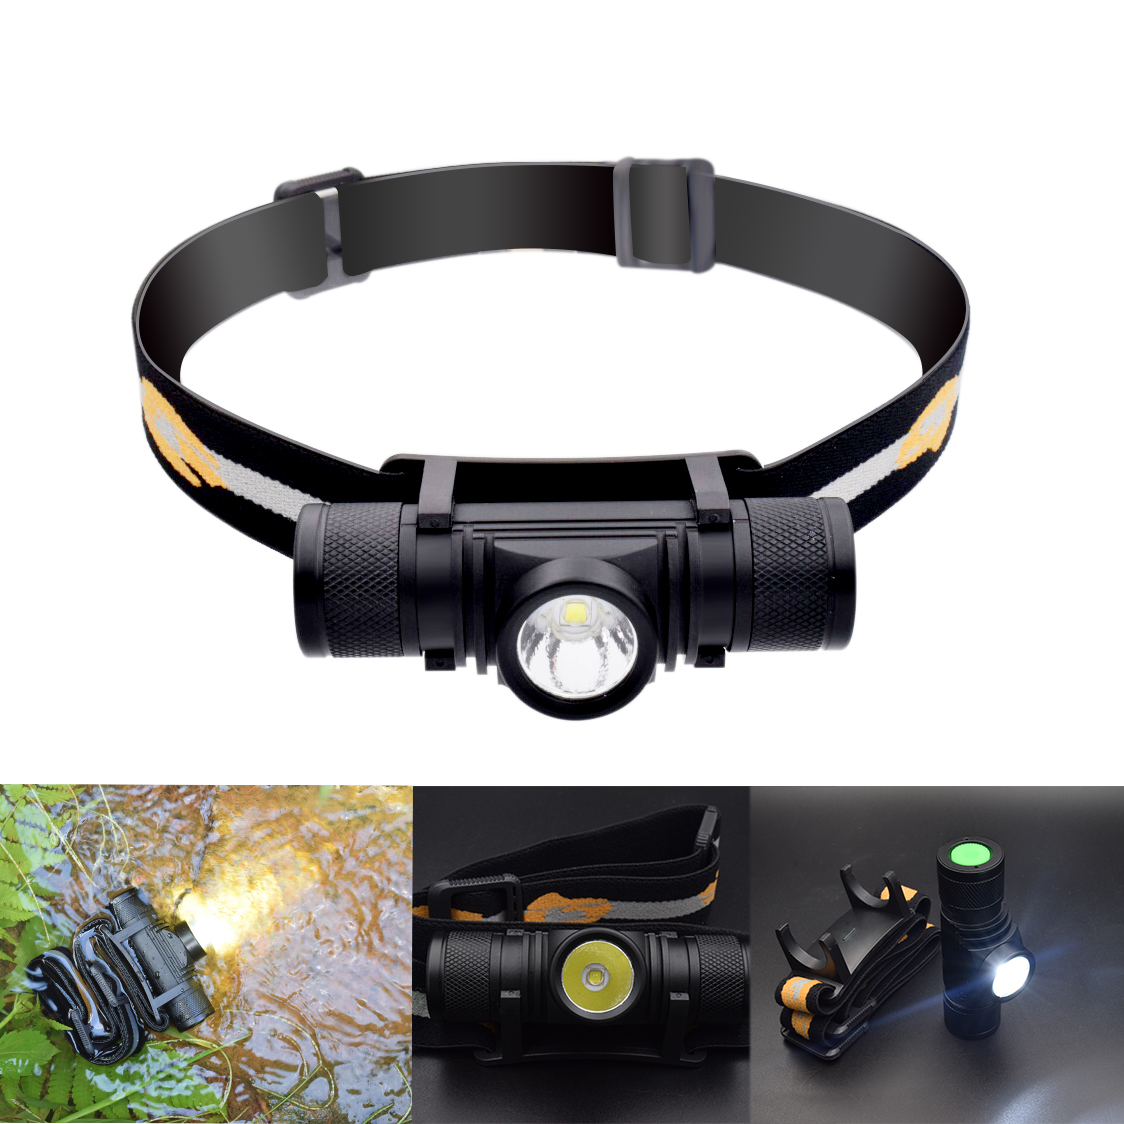 

XANES D10 1000LM XPL LED 6 Modes Stepless Dimming USB Charging Interface IPX6 Waterproof Cycling Headlamp 18650